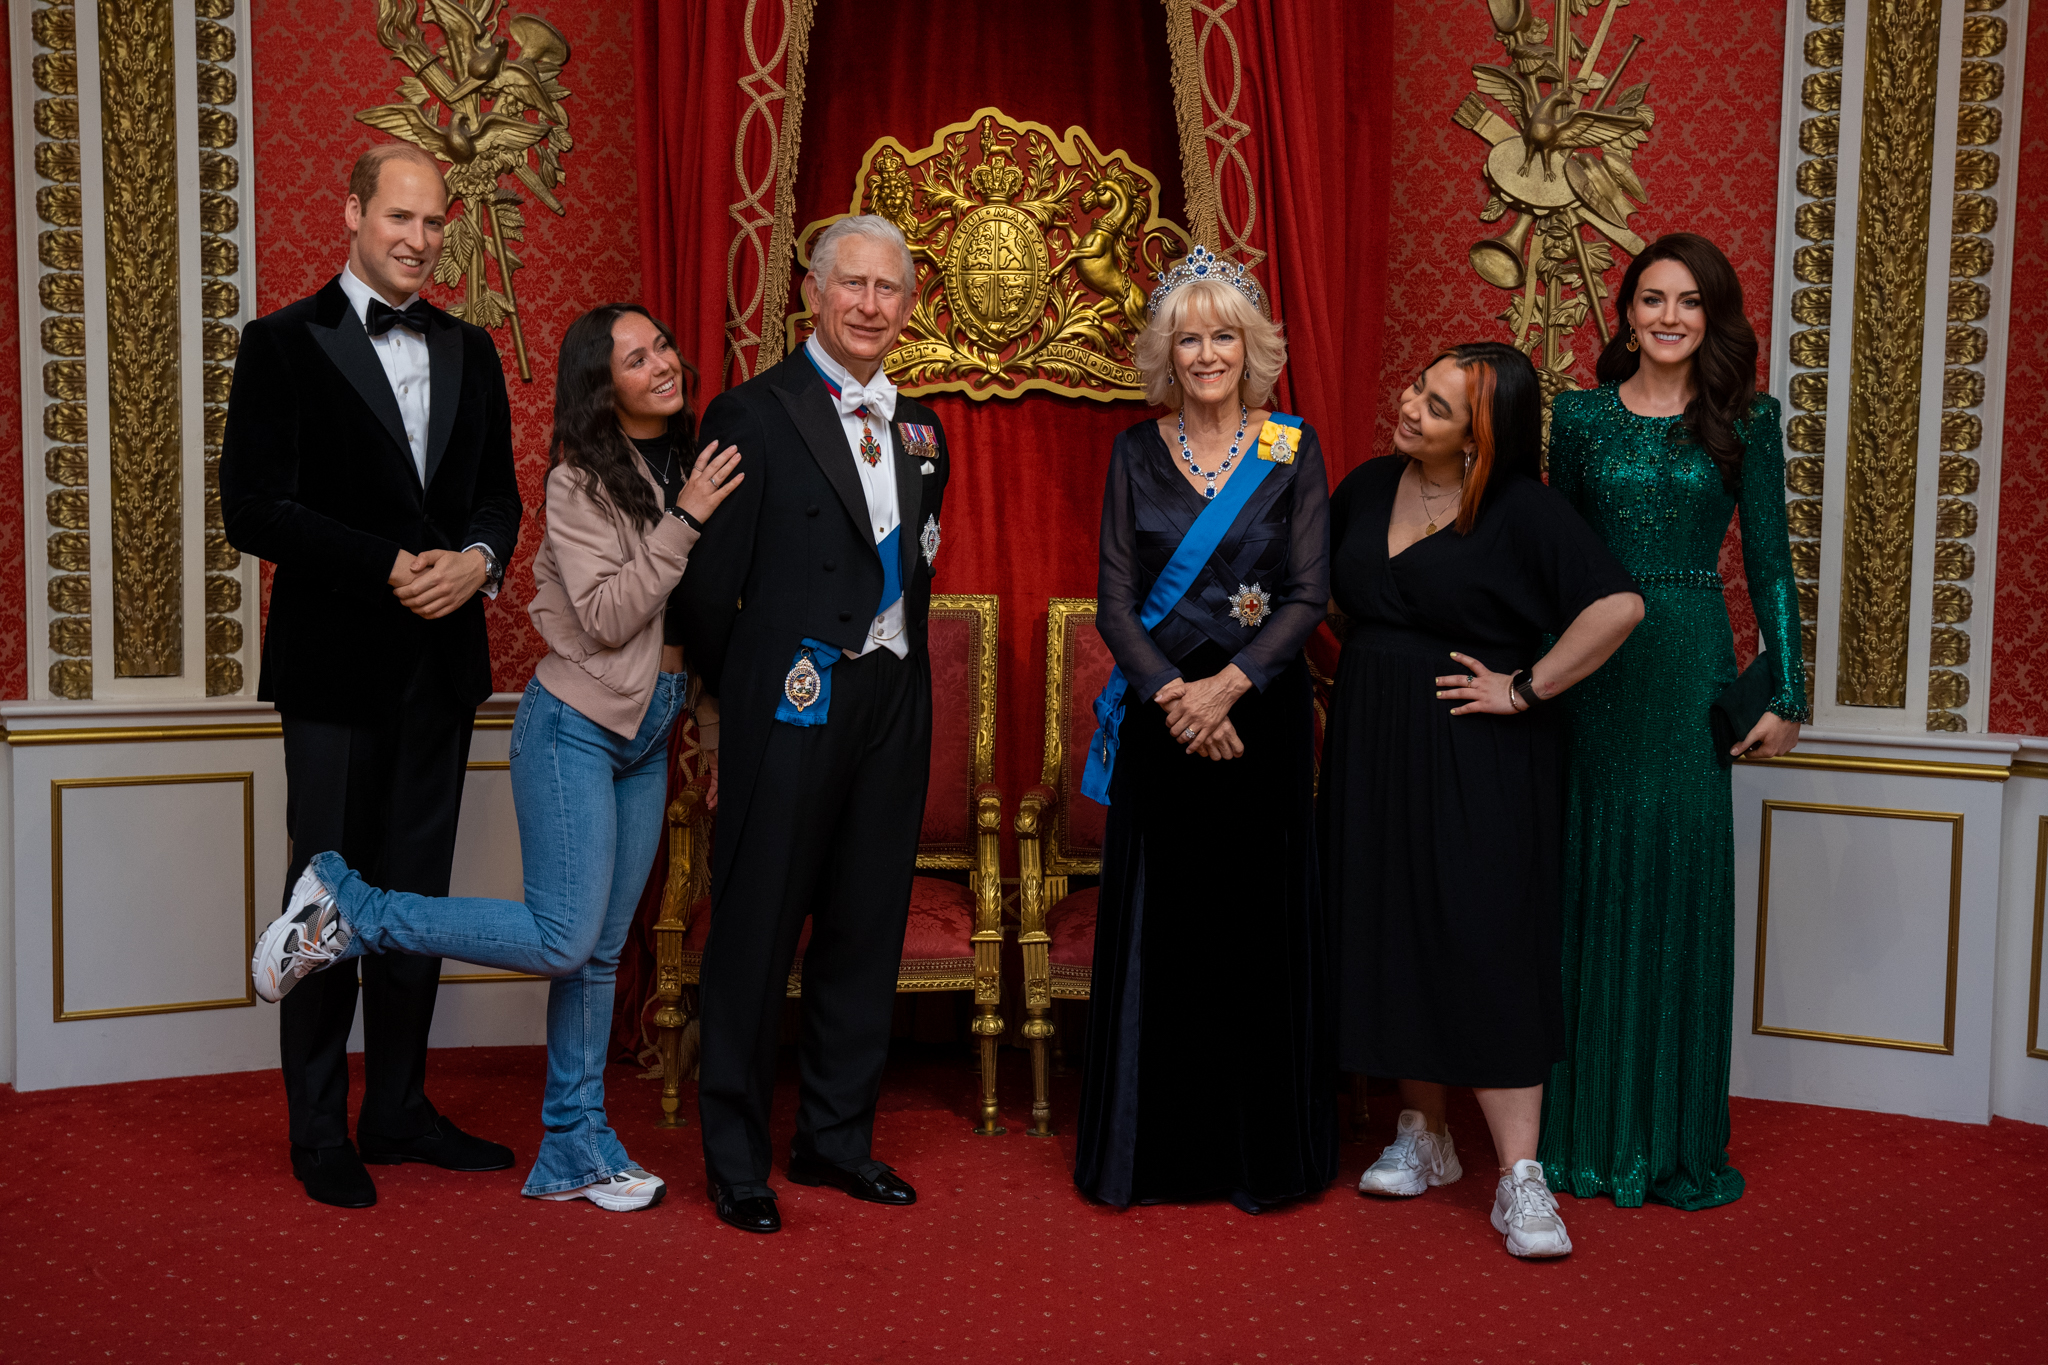 Friends enjoying the Royal Family figures at Madame Tussauds 